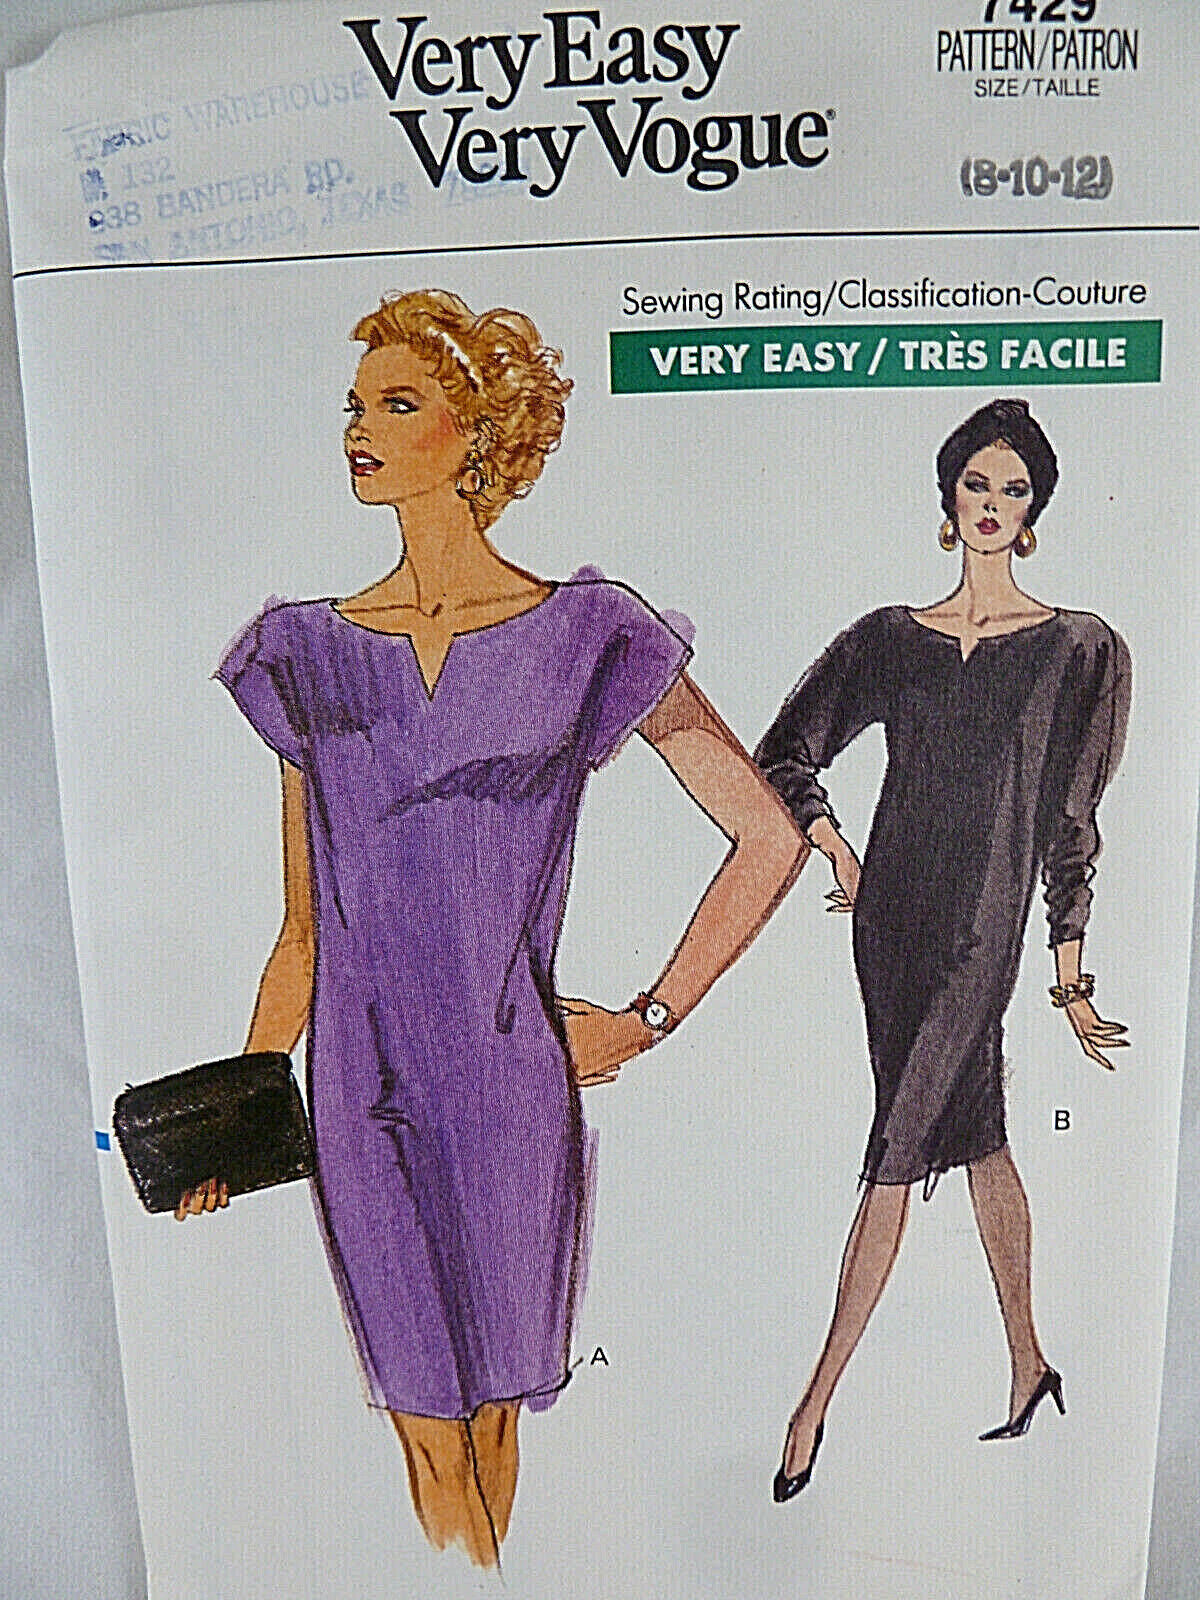 Primary image for Vintage Vogue Dress Pattern 7429 Sz 8 10 12 Uncut FF Very Easy